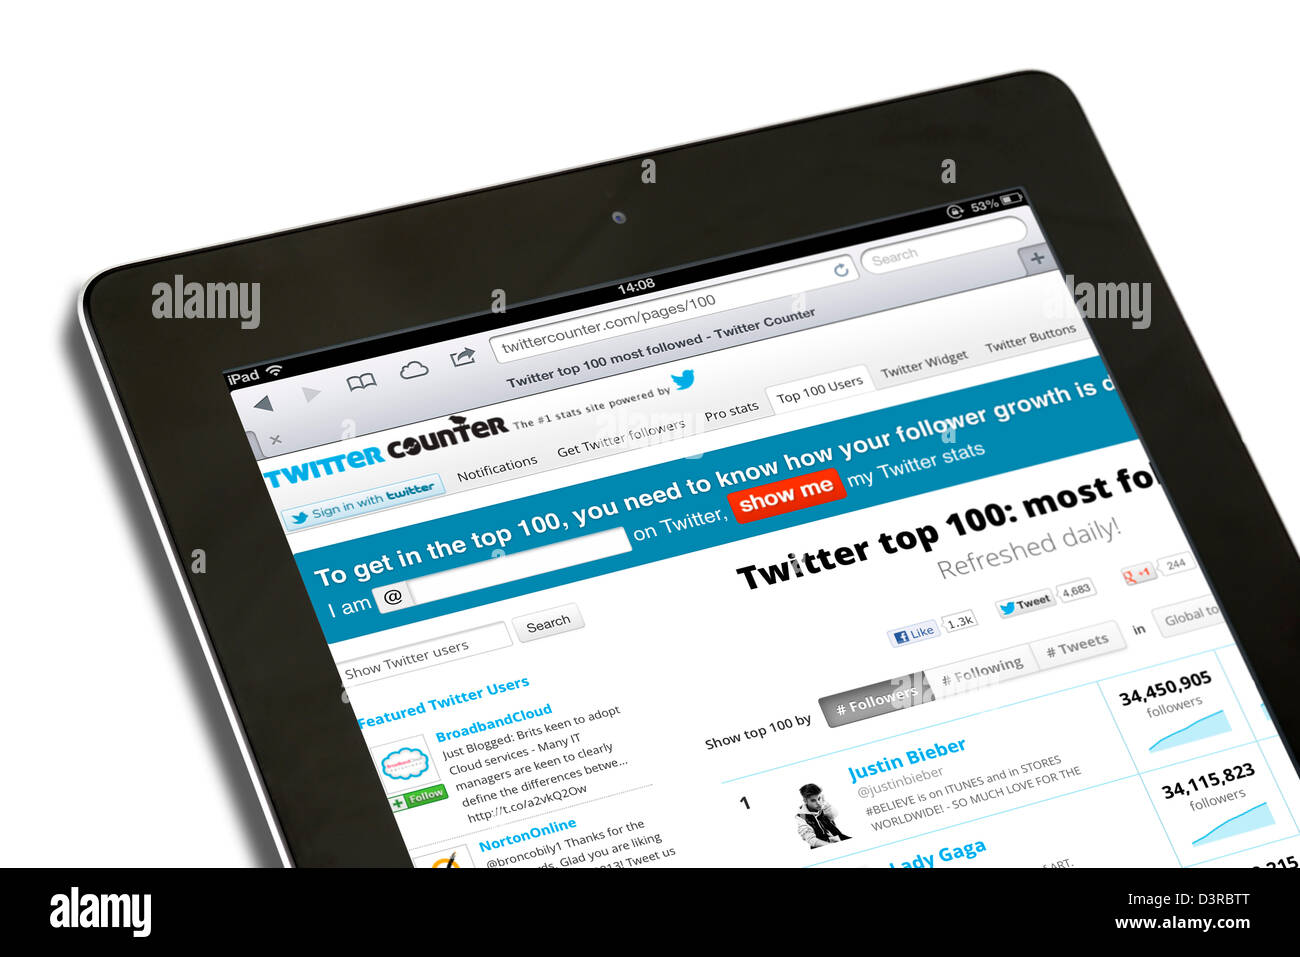 The TwitterCounter site showing the most followed Twitter users, viewed on a 4th generation iPad Stock Photo